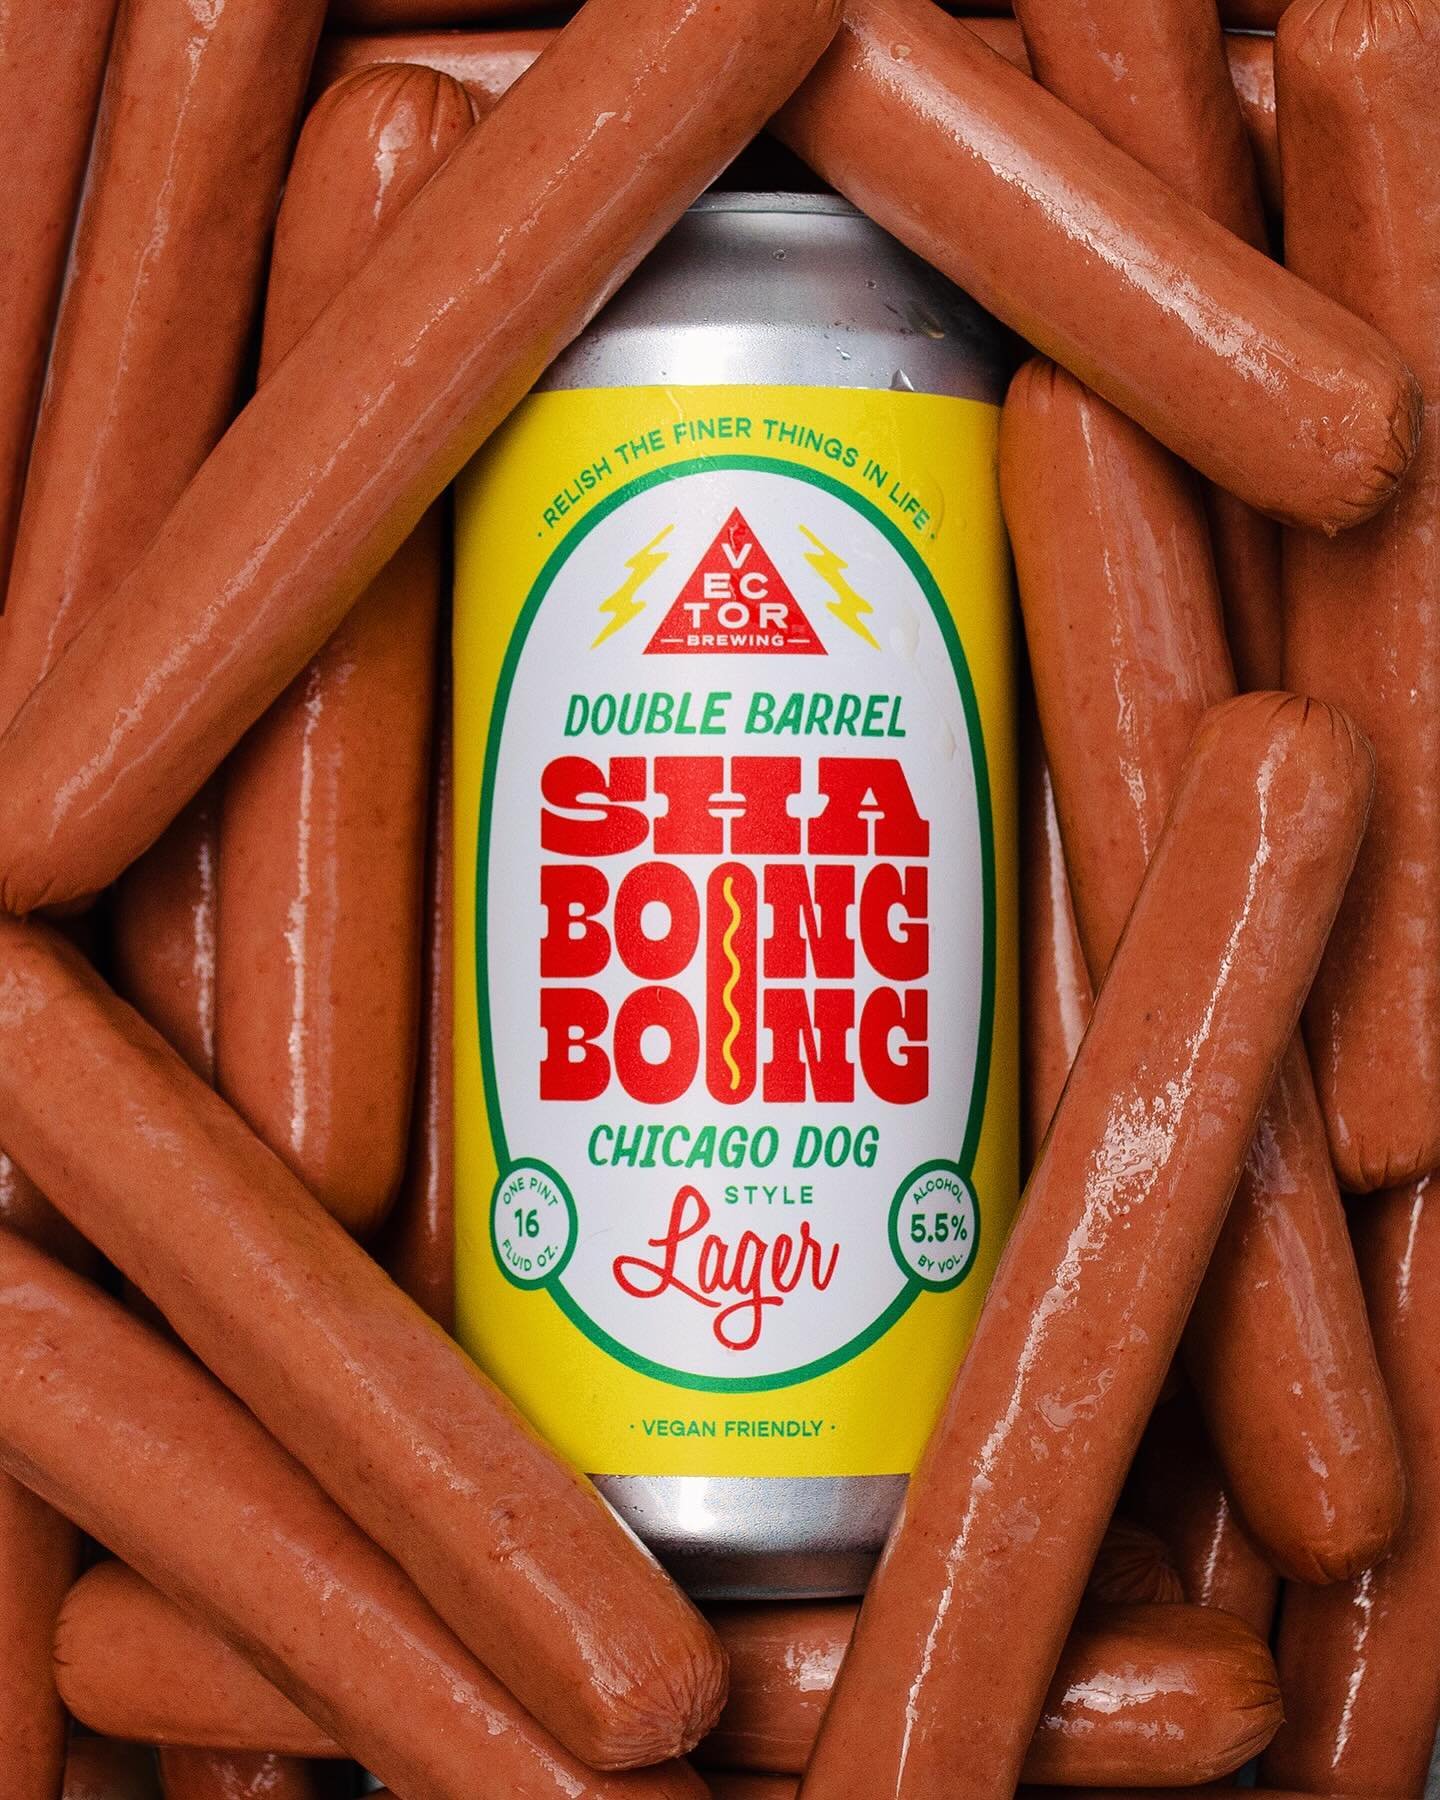 𝘿𝙊𝙐𝘽𝙇𝙀 𝘽𝘼𝙍𝙍𝙀𝙇 𝙎𝙃𝘼 𝘽𝙊𝙄𝙉𝙂 𝘽𝙊𝙄𝙉𝙂 / Chicago Dog-style Lager / 5.5% ABV

🌭🌭🌭🌭🌭🌭🌭🌭🌭🌭

Inspired by the Windy City classic and a fav of sports fans everywhere, Double Barrel Sha Boing Boing is our nod to the infamous glizzy